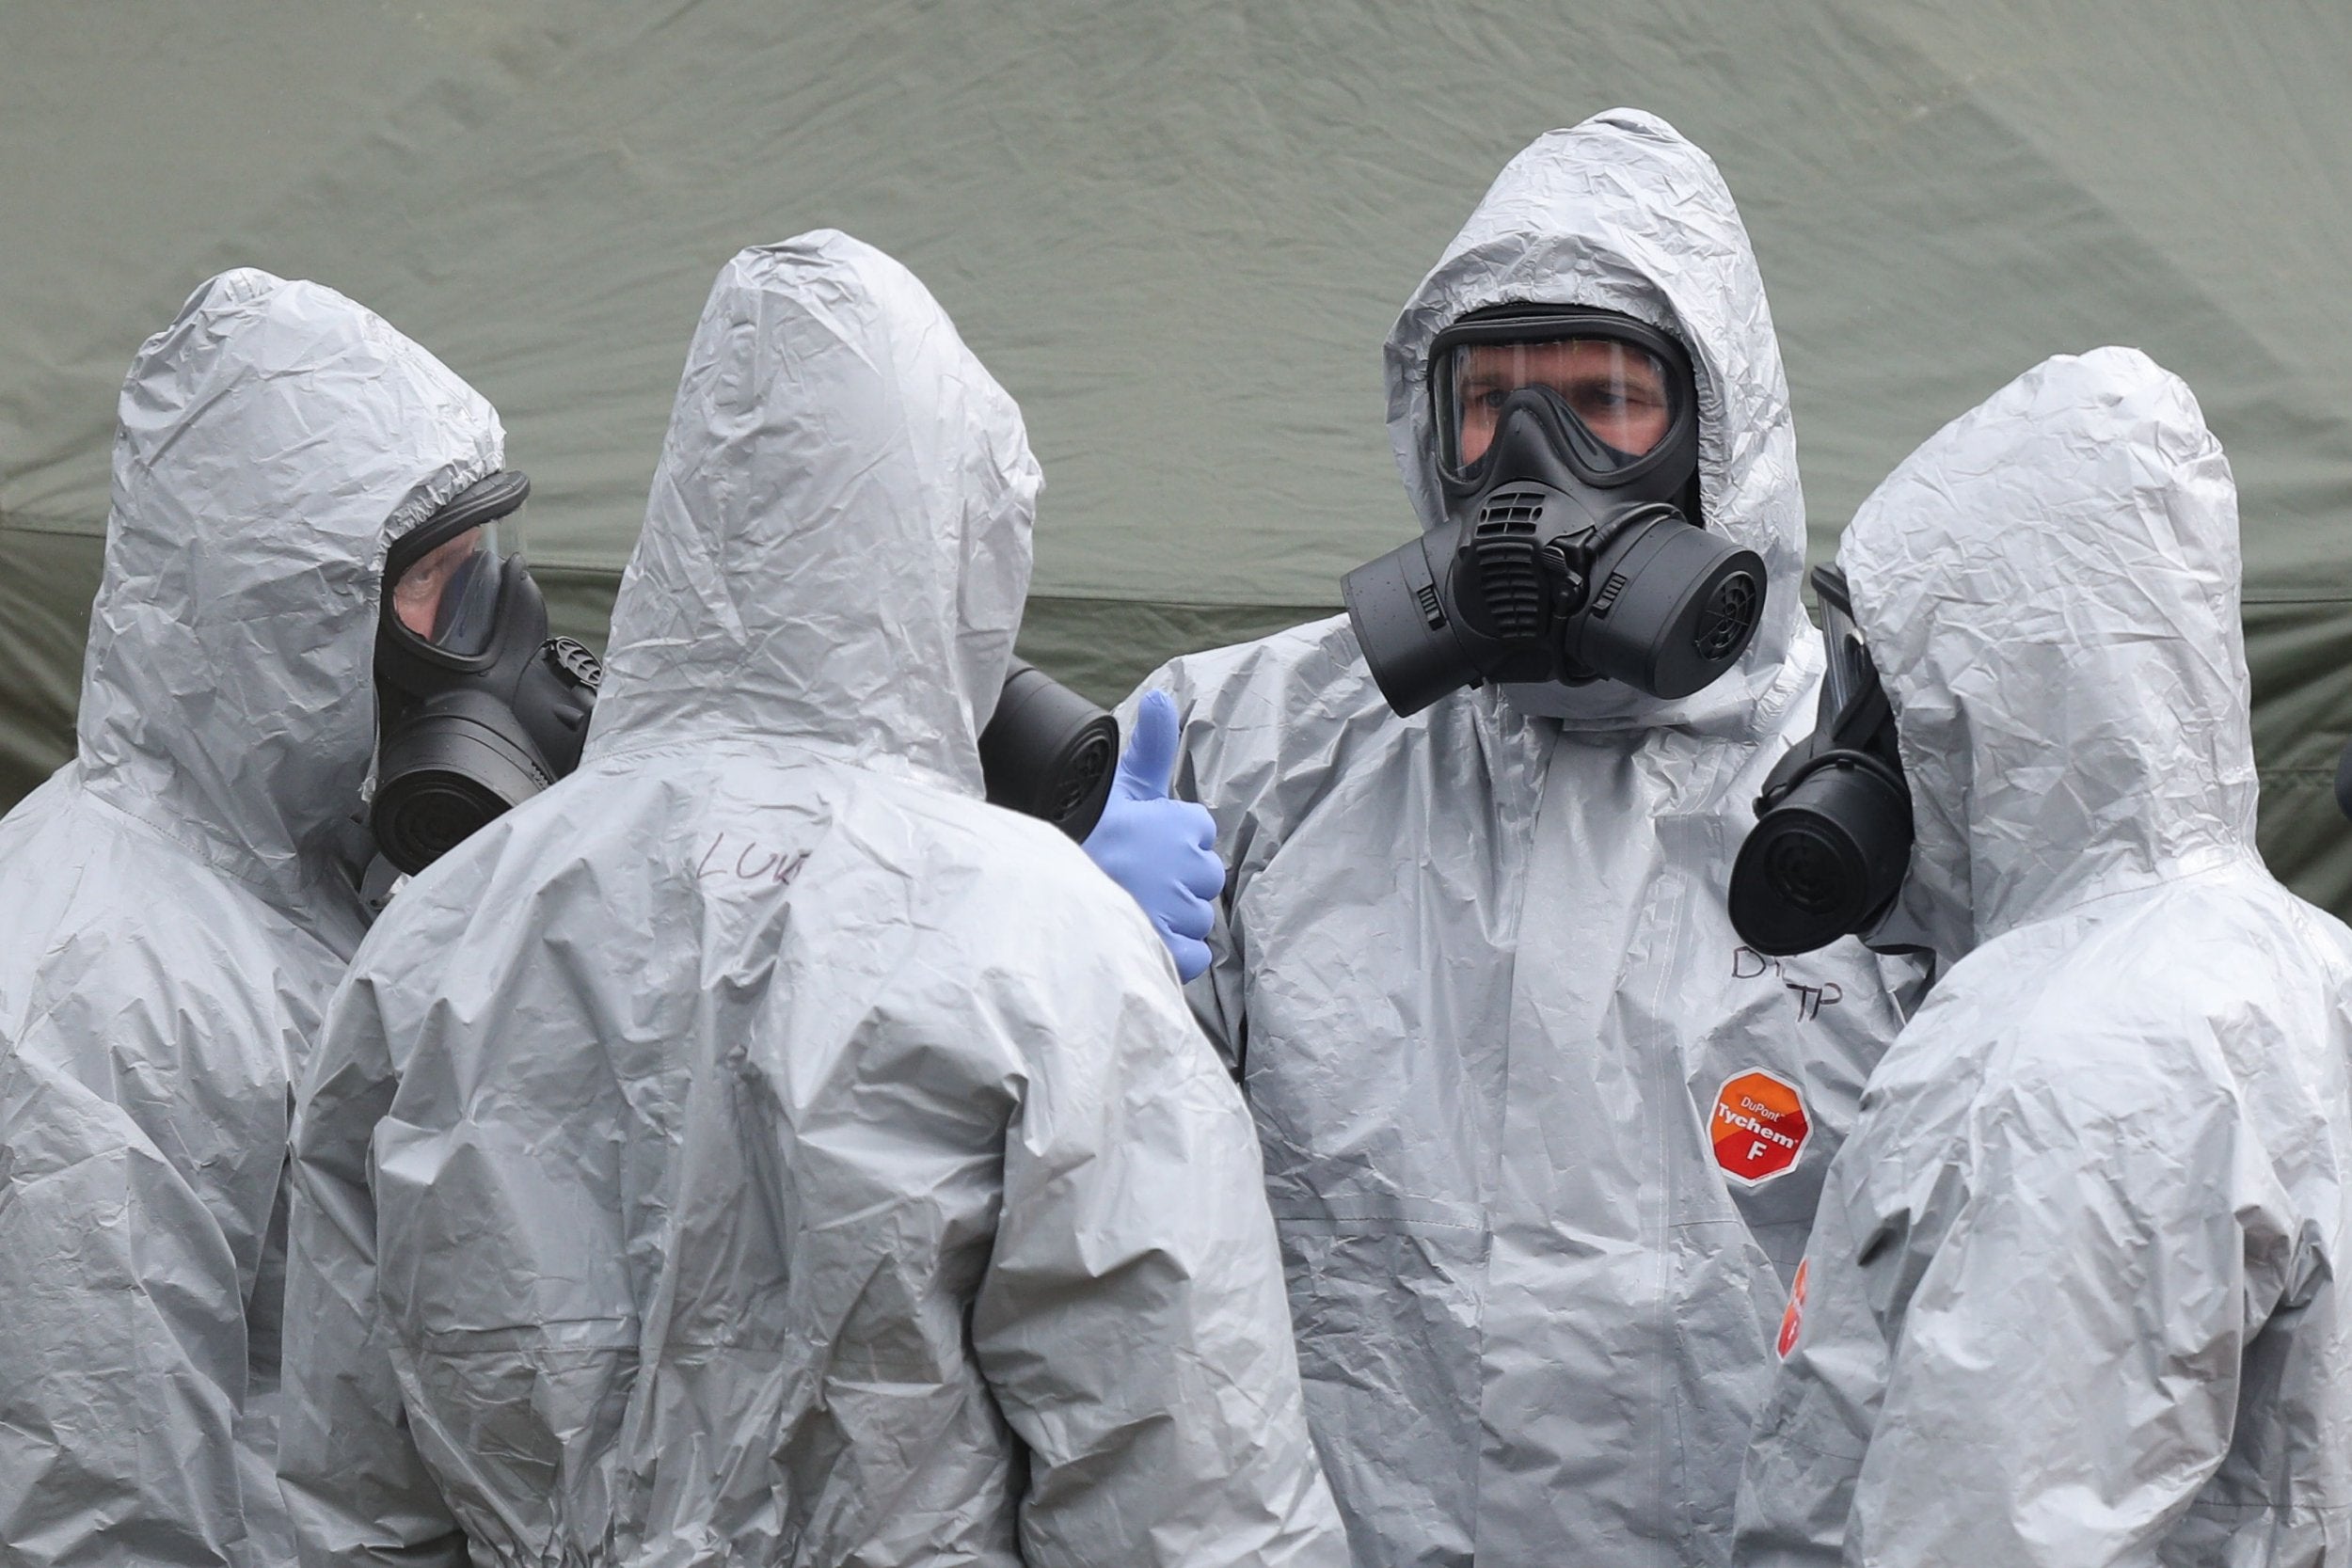 Military personnel investigating the poisoning of Sergei and Yulia Skripal